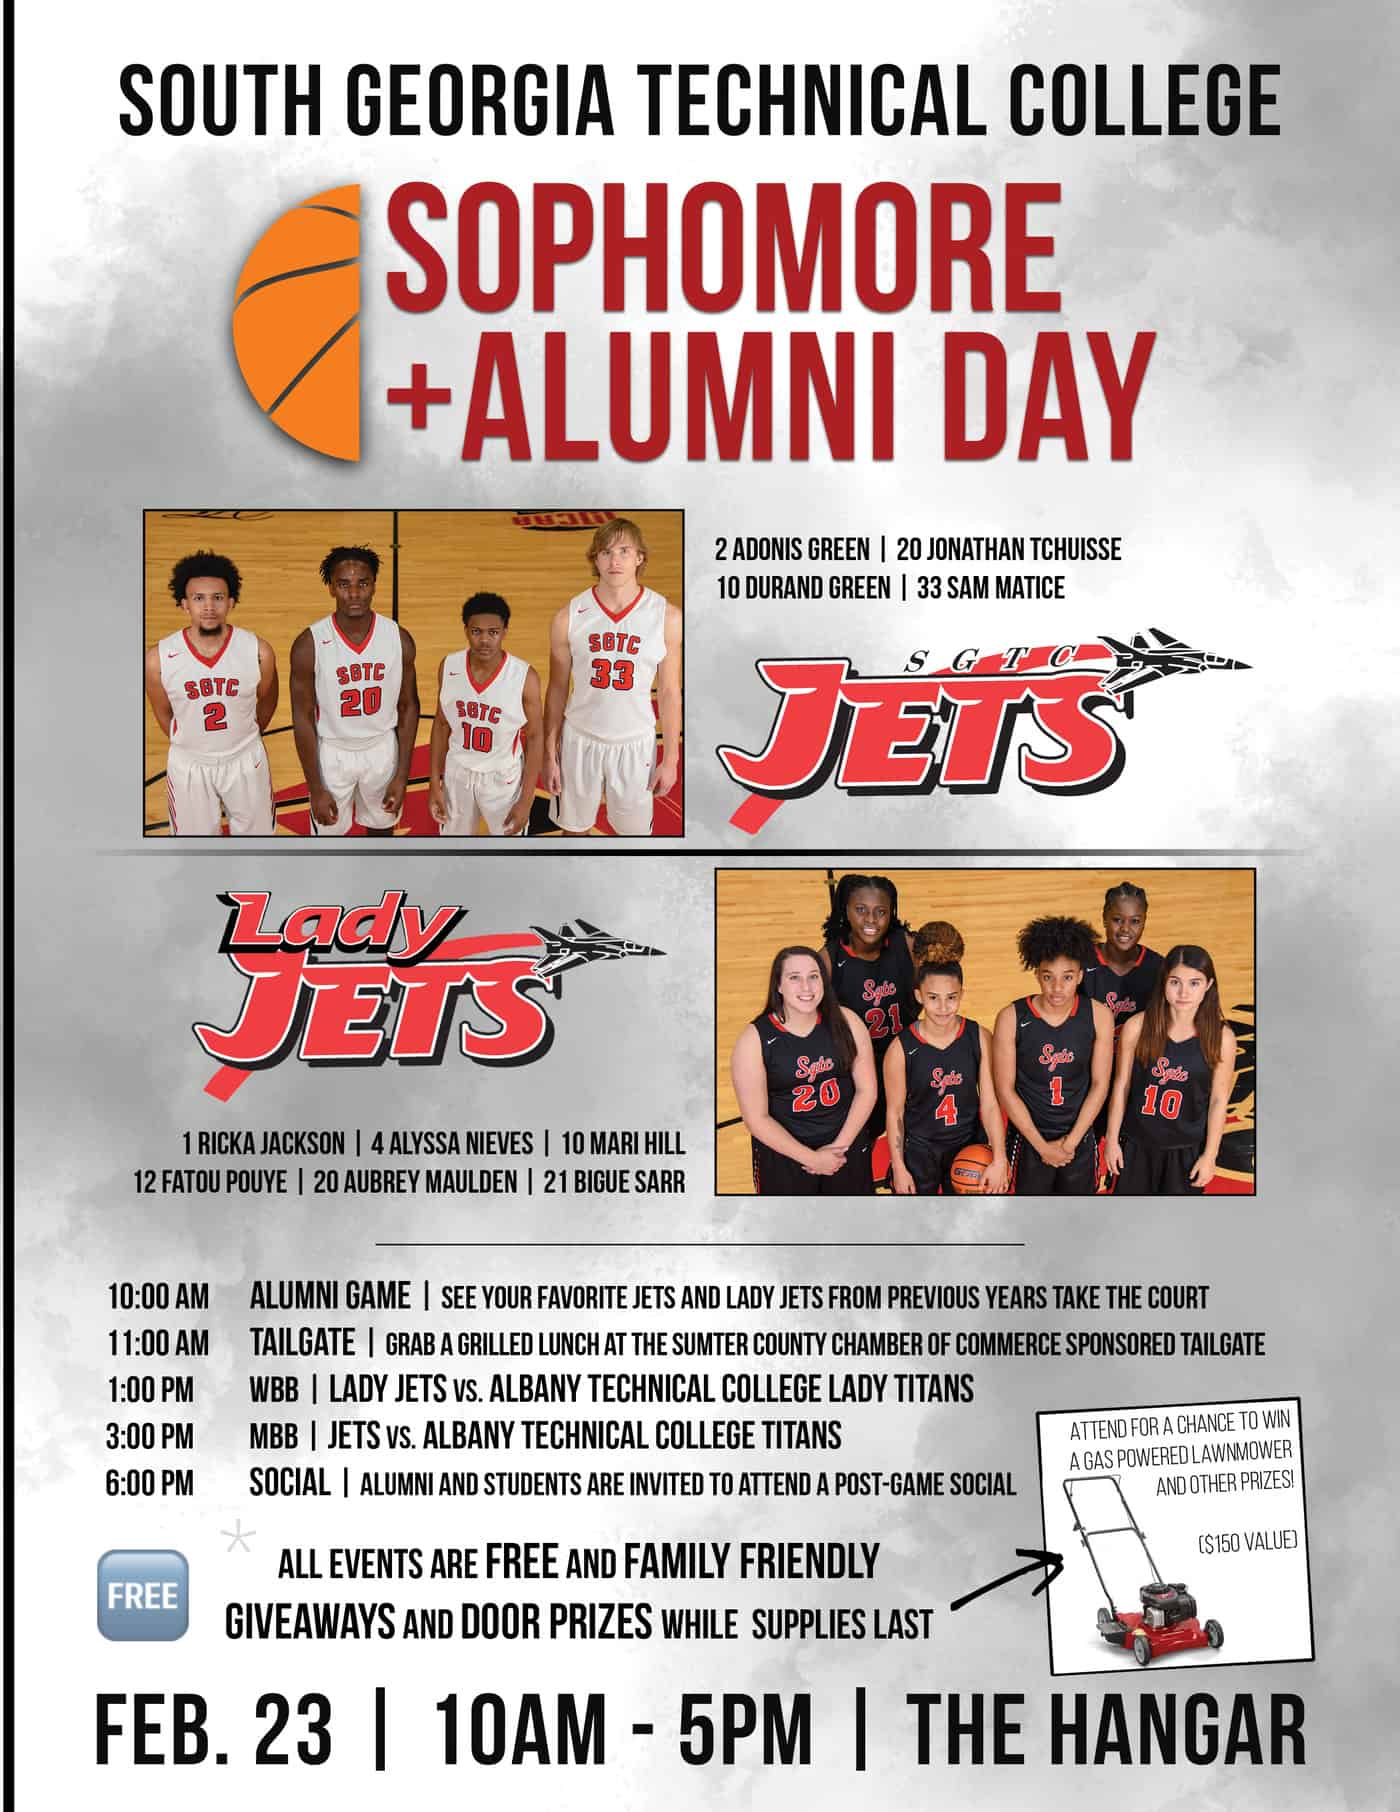 Sophomore and Alumni Day set for February 23rd at SGTC. All alumni, students, faculty and staff, and retirees are urged to come out and enjoy the festivities.